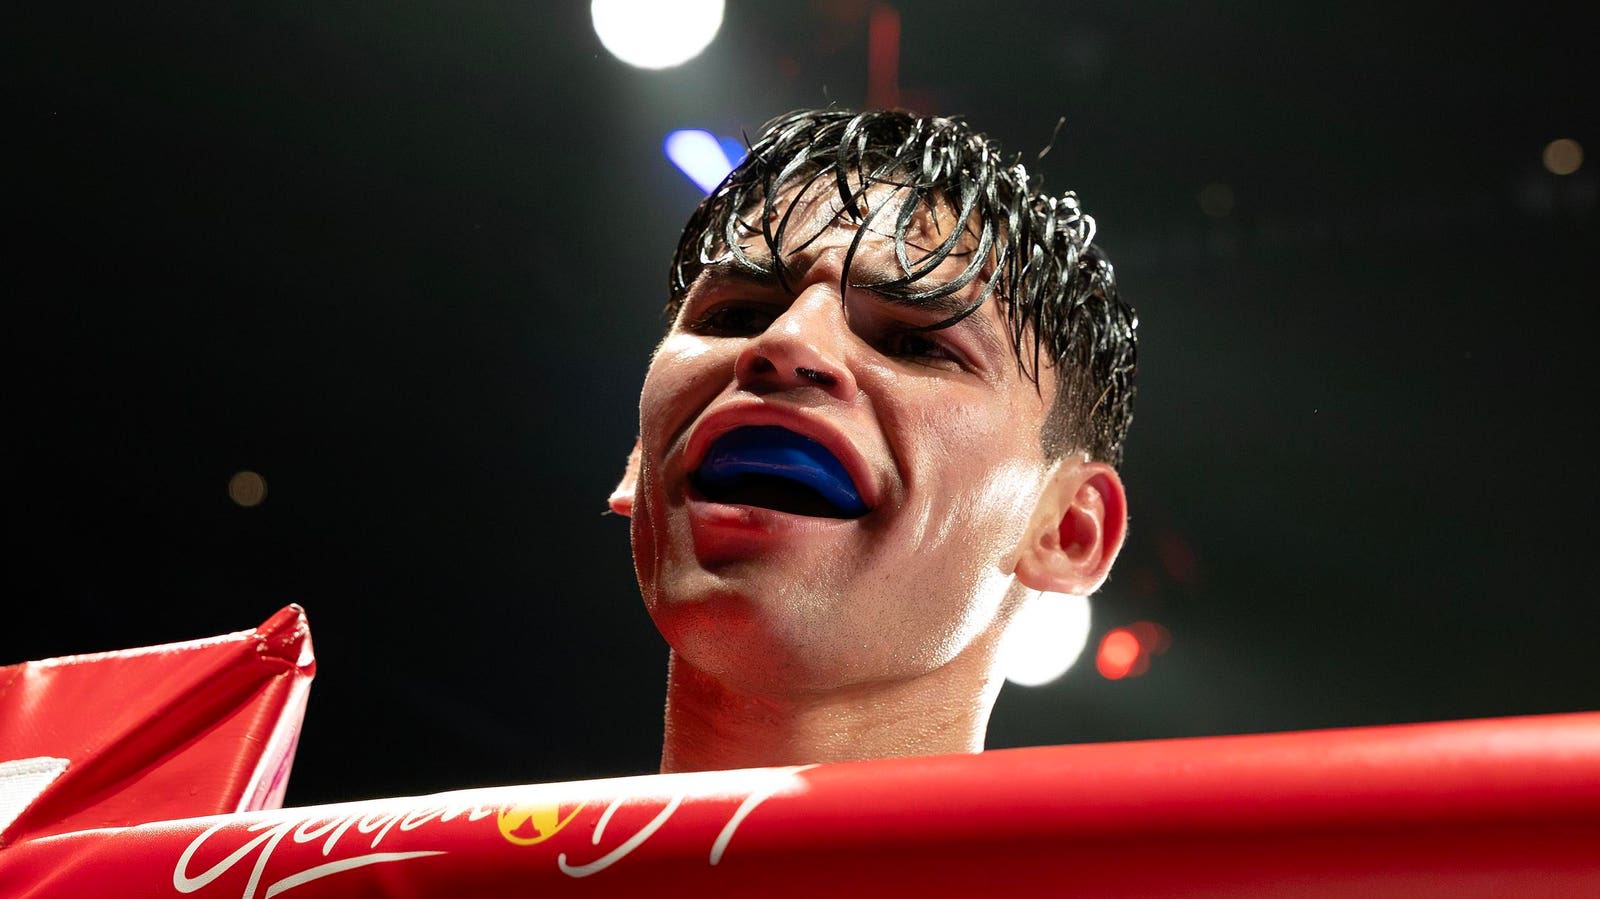 Ryan Garcia: What’s Ostarine And How Could A Boxer Use It To Cheat?